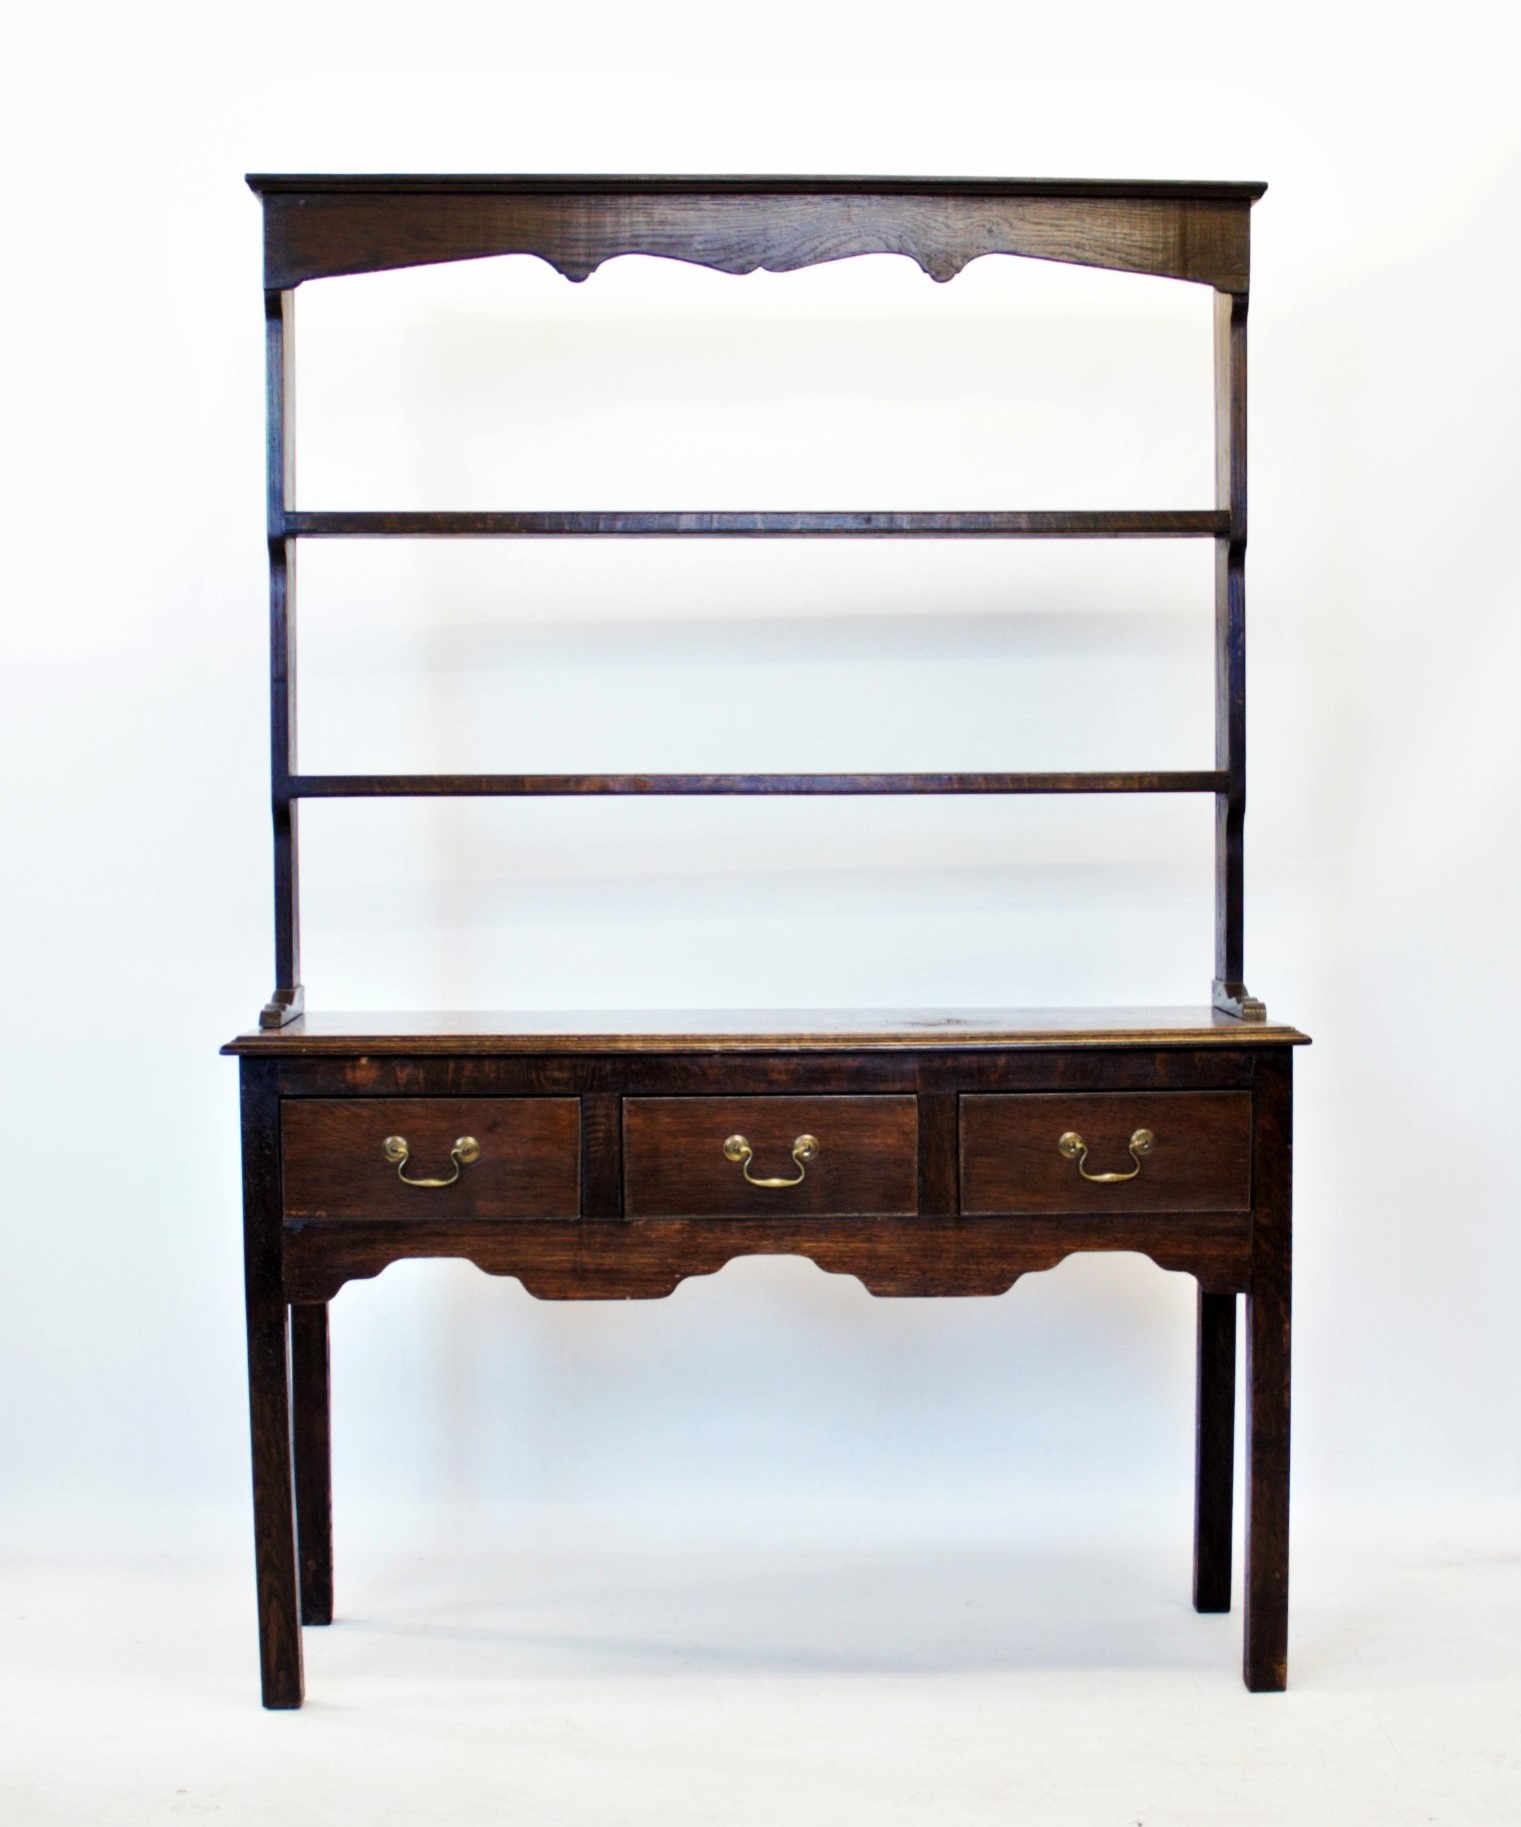 An 18th century style oak dresser, 20th century, with an open plate rack above a rectangular moulded